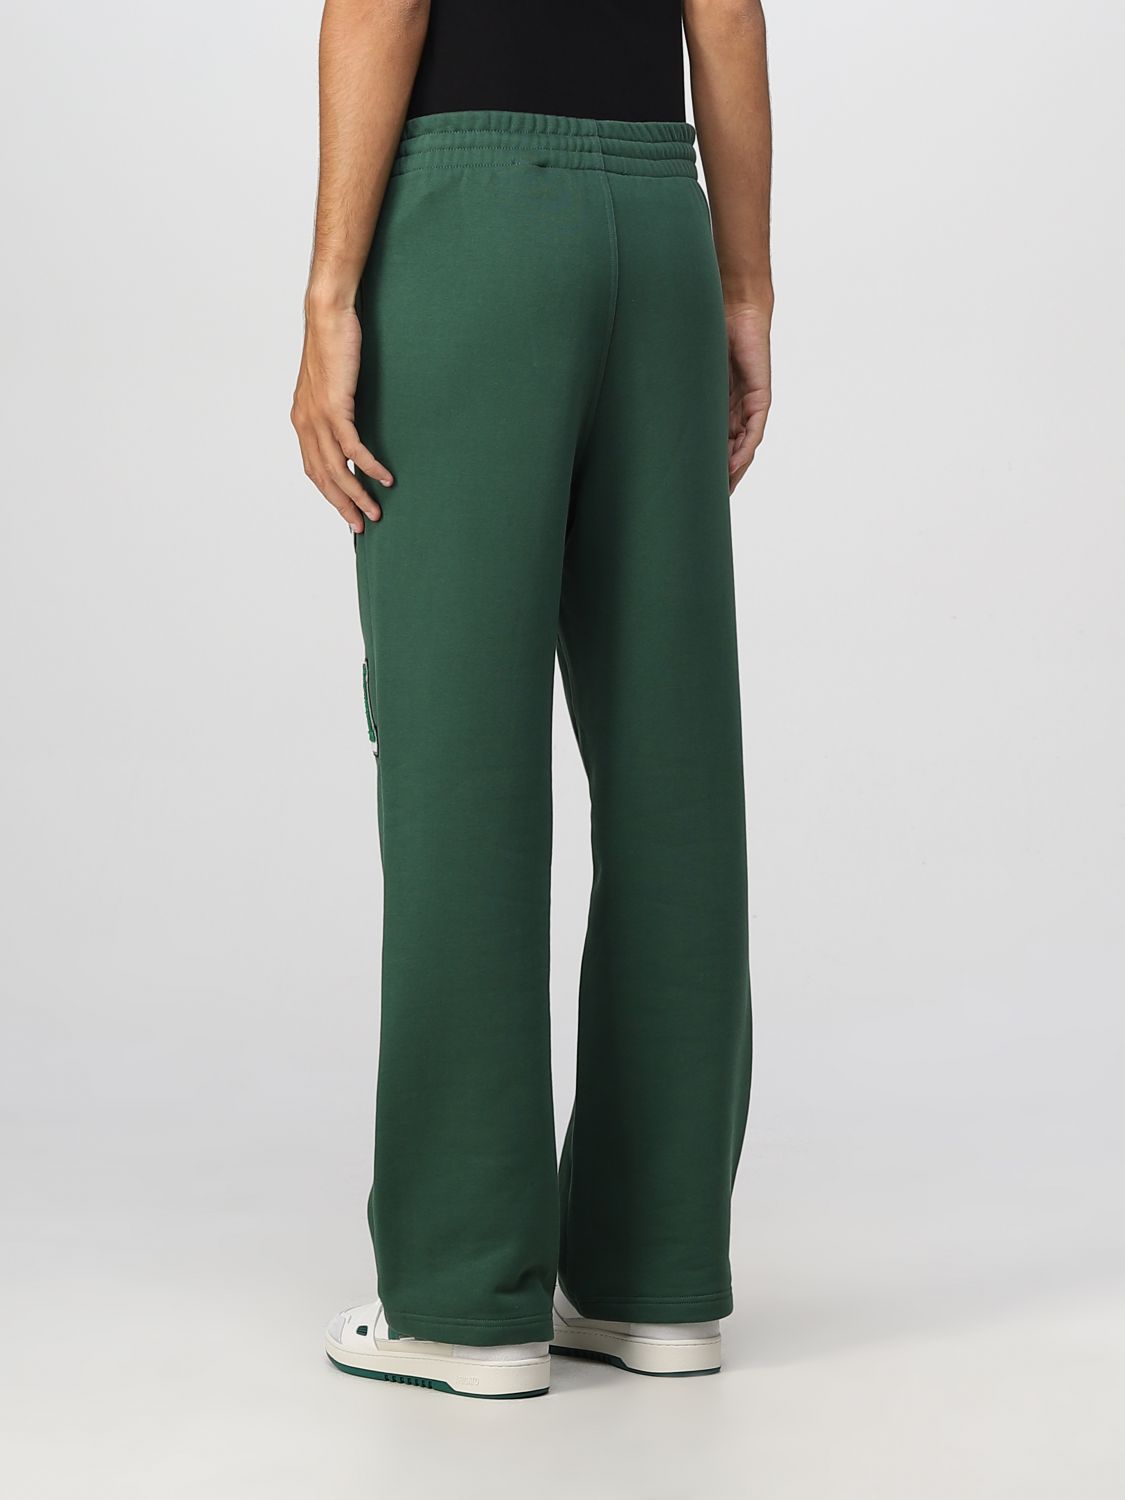 Trousers Axel Arigato: Axel Arigato trousers for men green 3